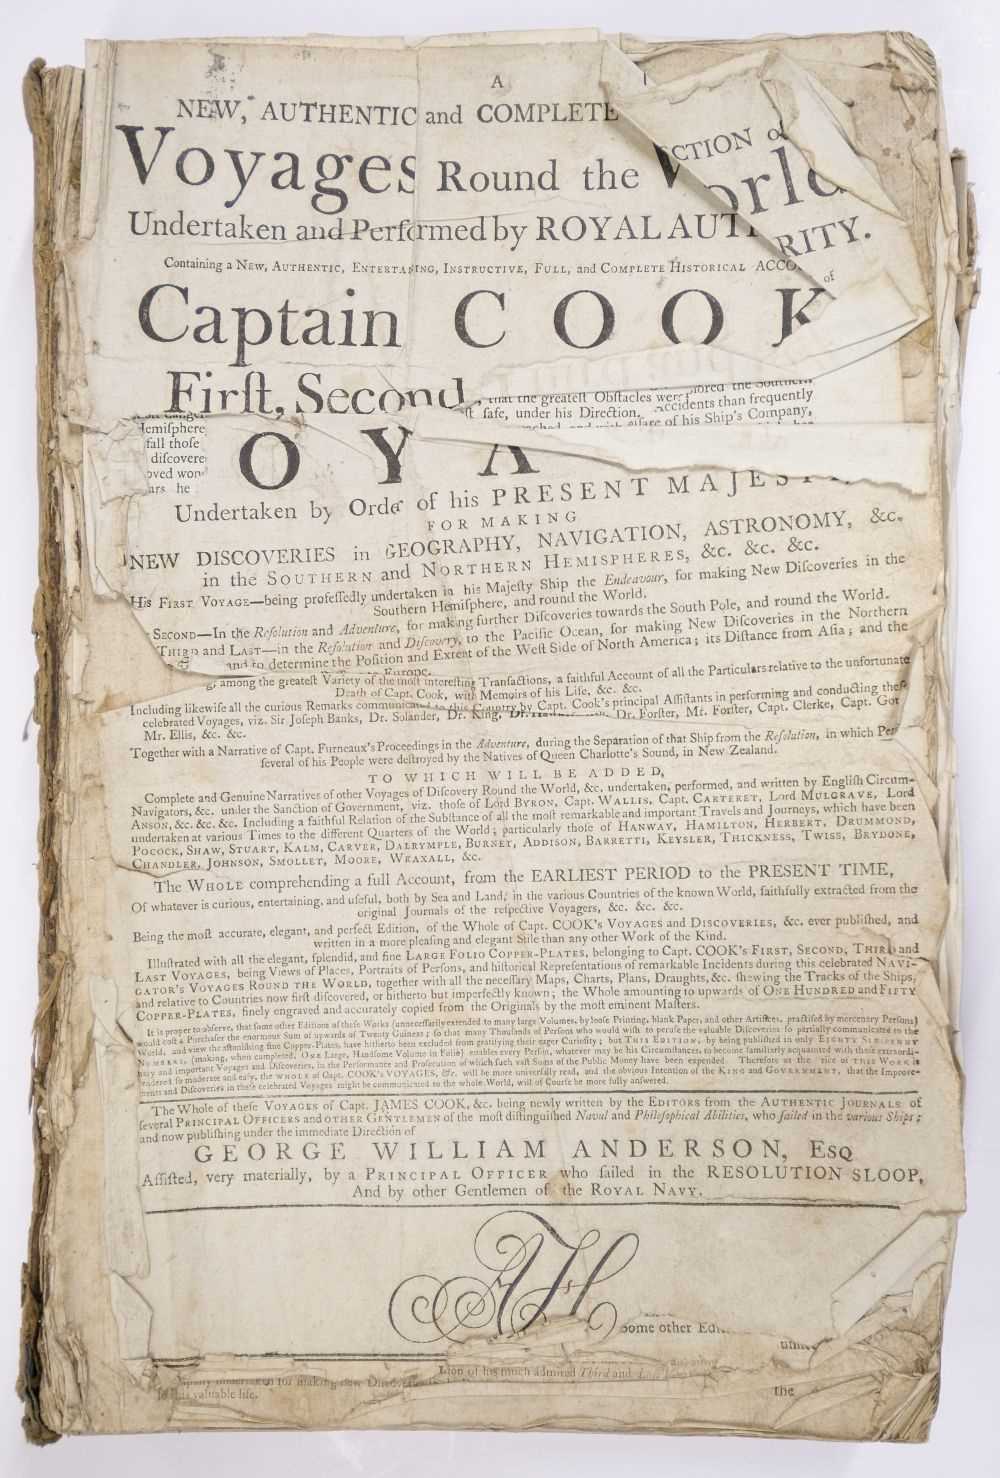 Lot 7 - Cook (James). A New, Authentic, and Complete Collection of Voyages Round the World, [1784?]